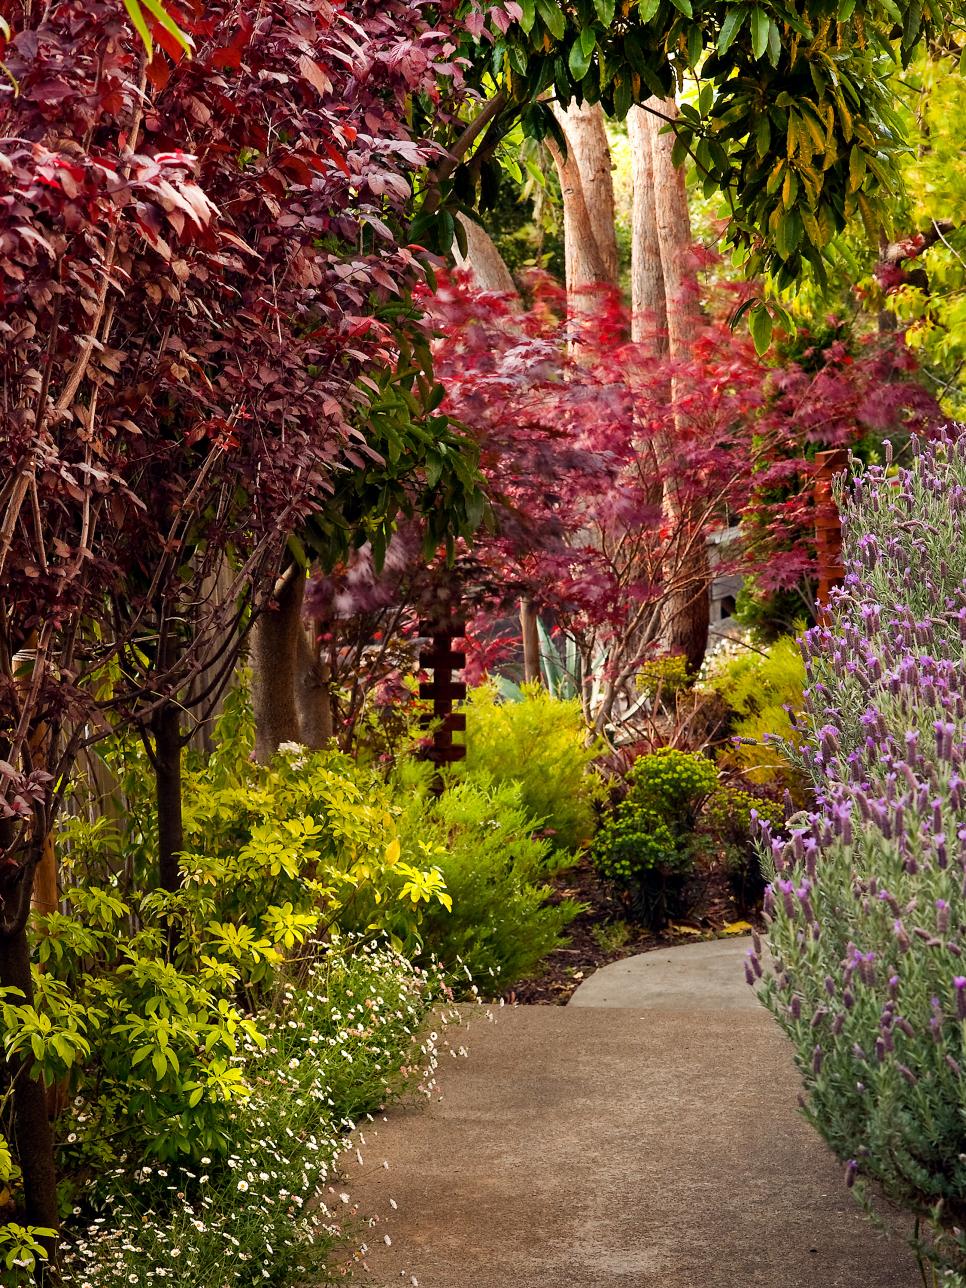 Walkway Lined with Colorful Flowering Plants and Trees